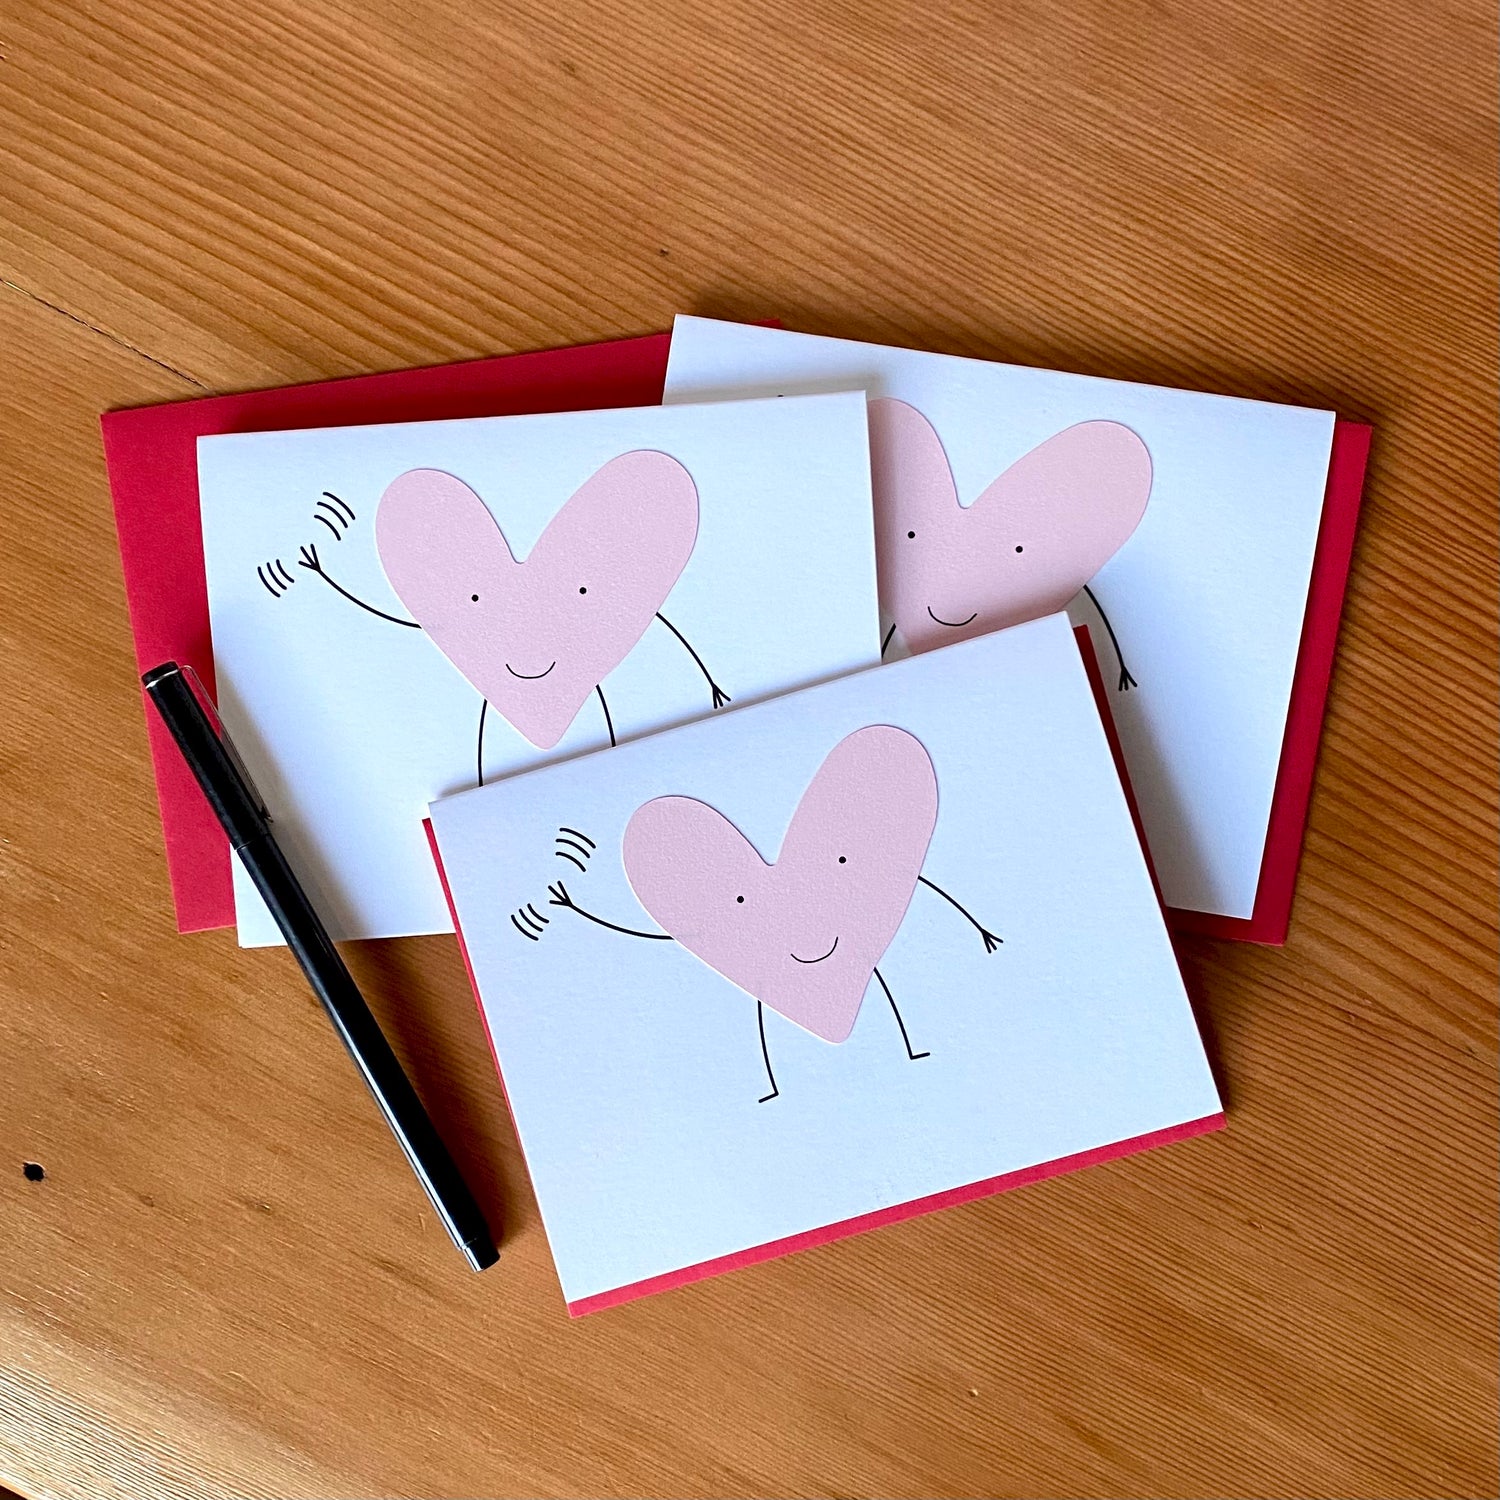 Greeting card with a pink smiling heart with arms & legs, waving.